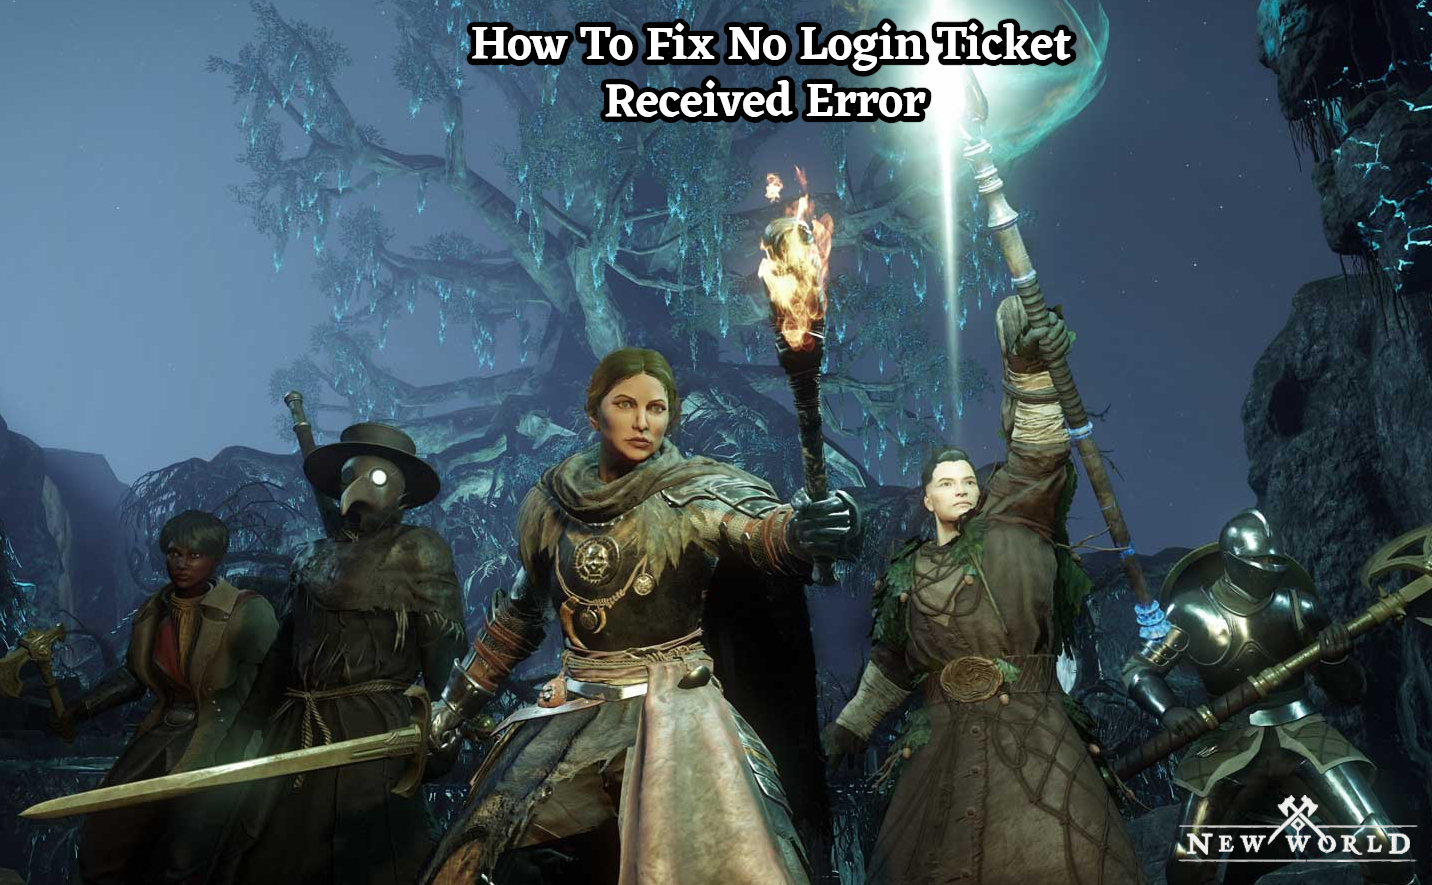 How To Fix No Login Ticket Received Error In New World